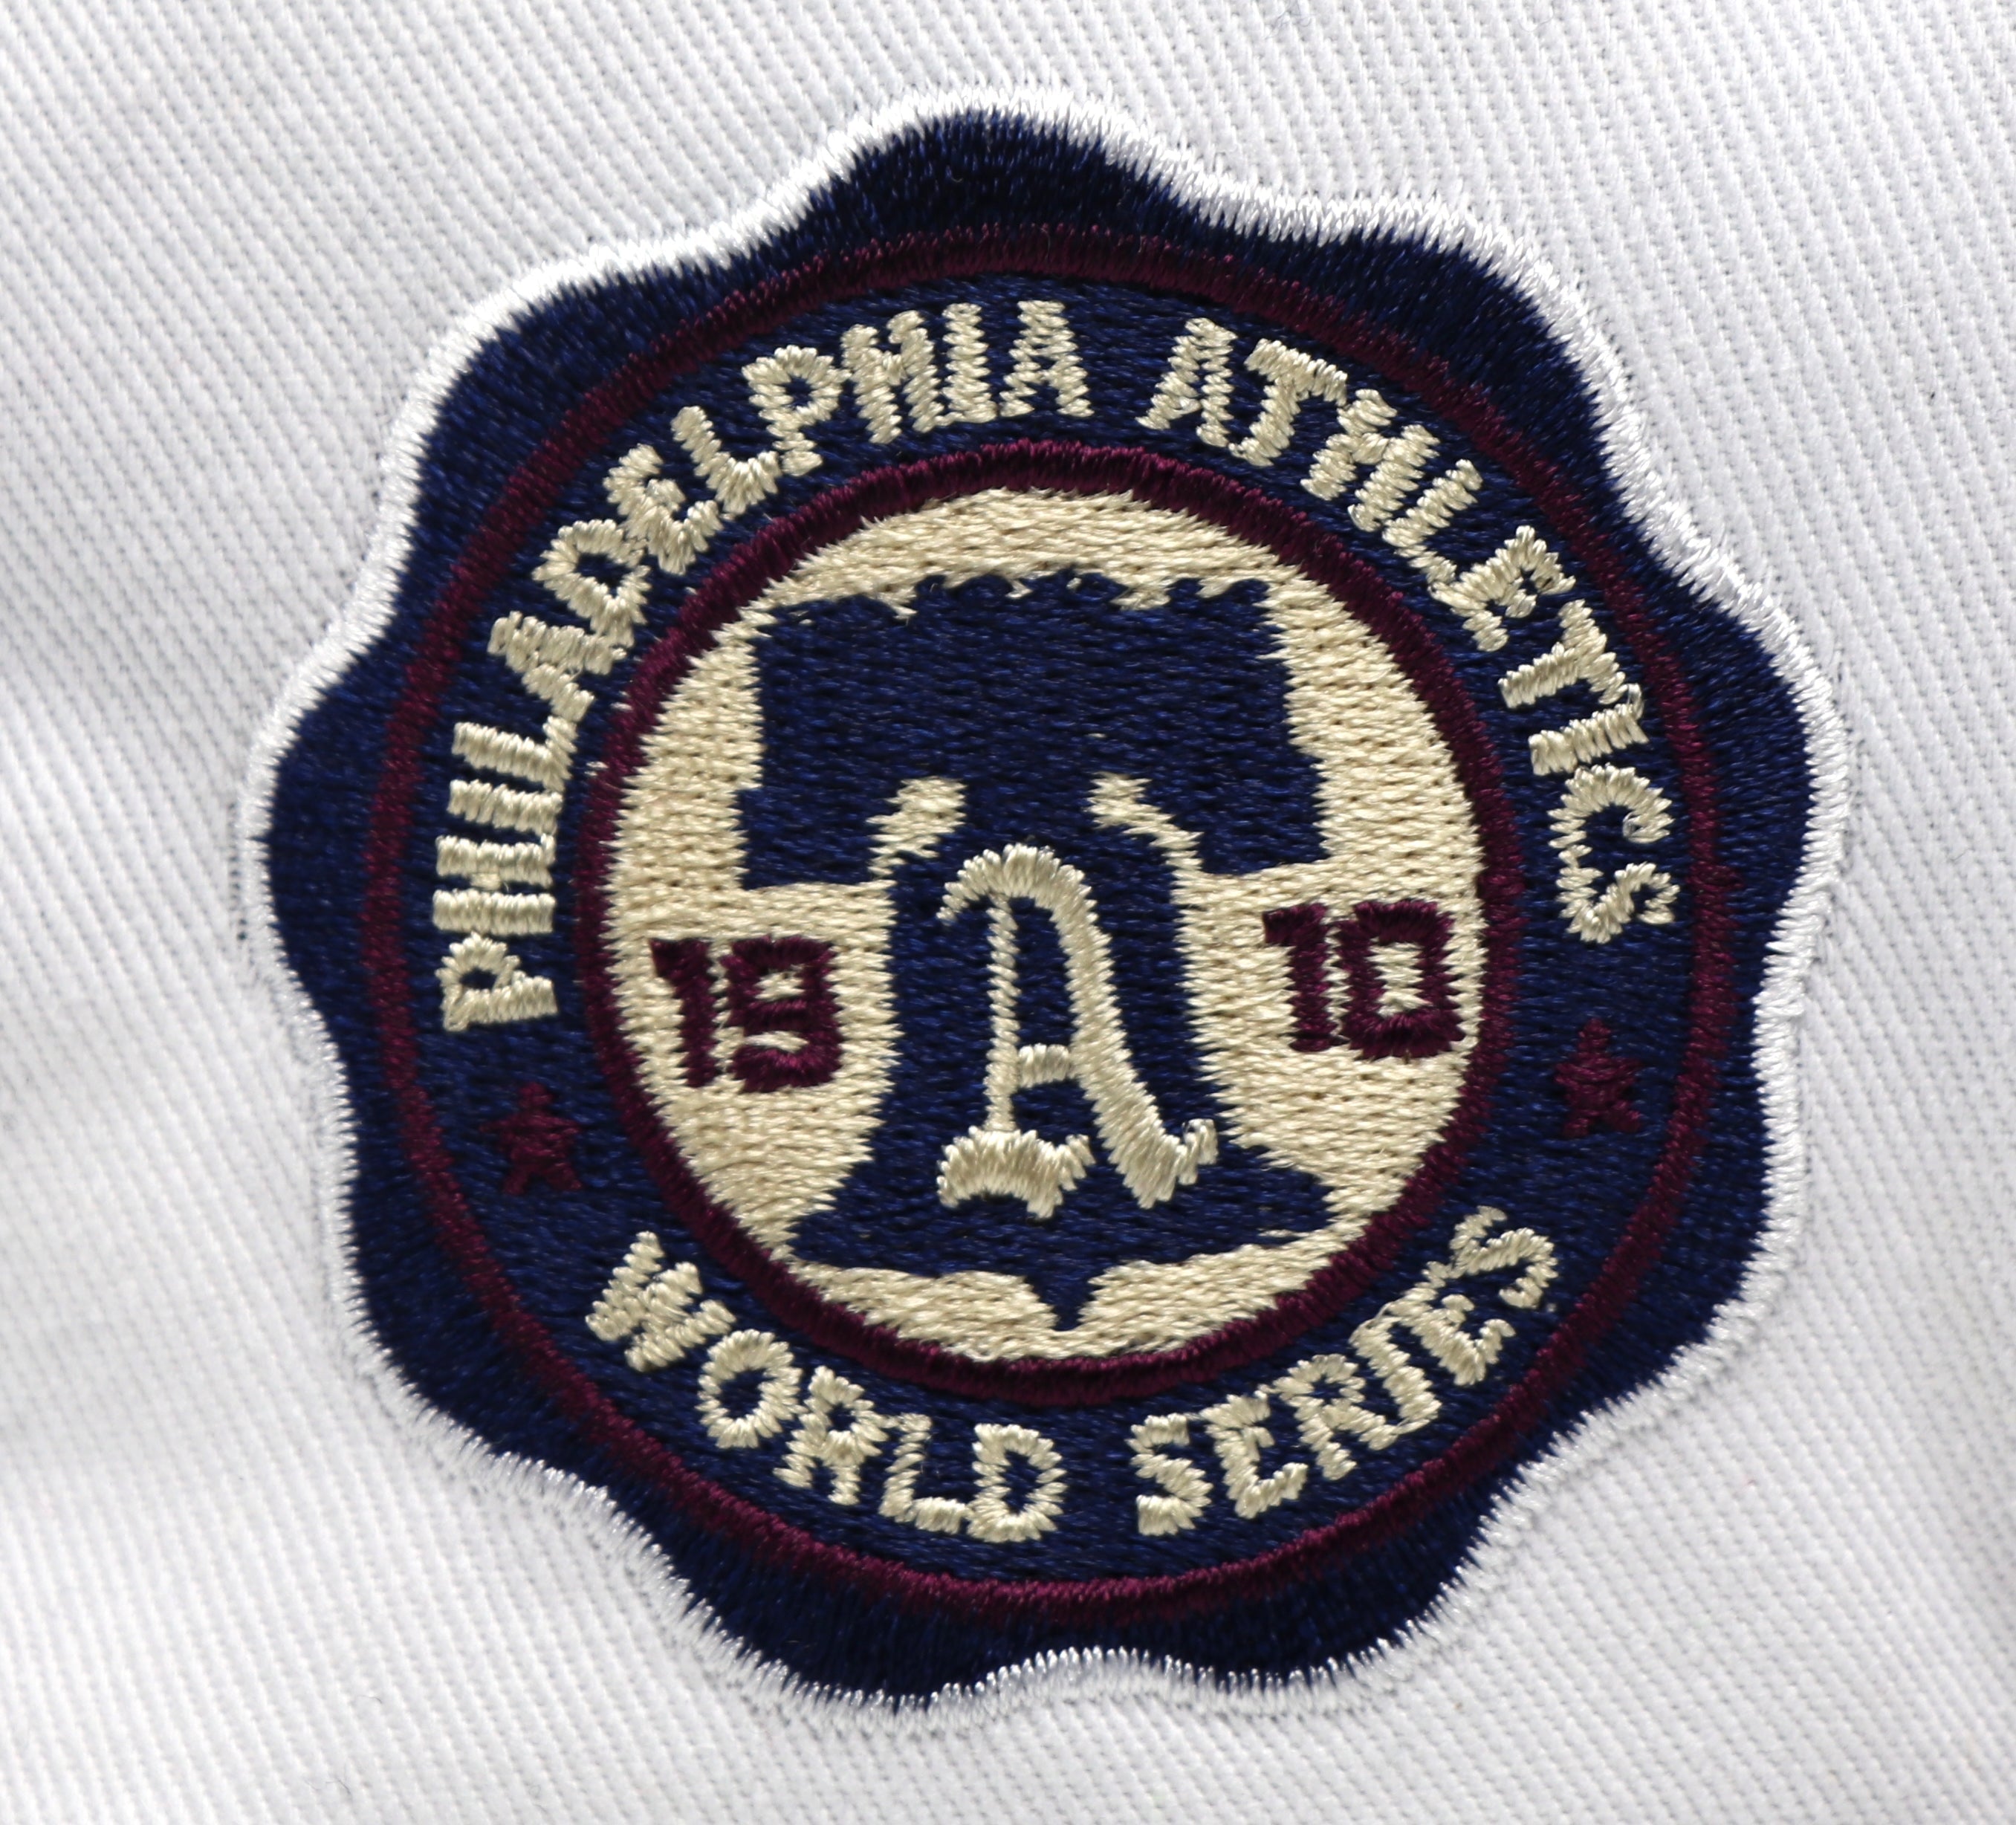 PHILADELPHIA ATHLETIC (WHITE) (1910 WORLD SERIES) NEW ERA 59FIFTY FITTED